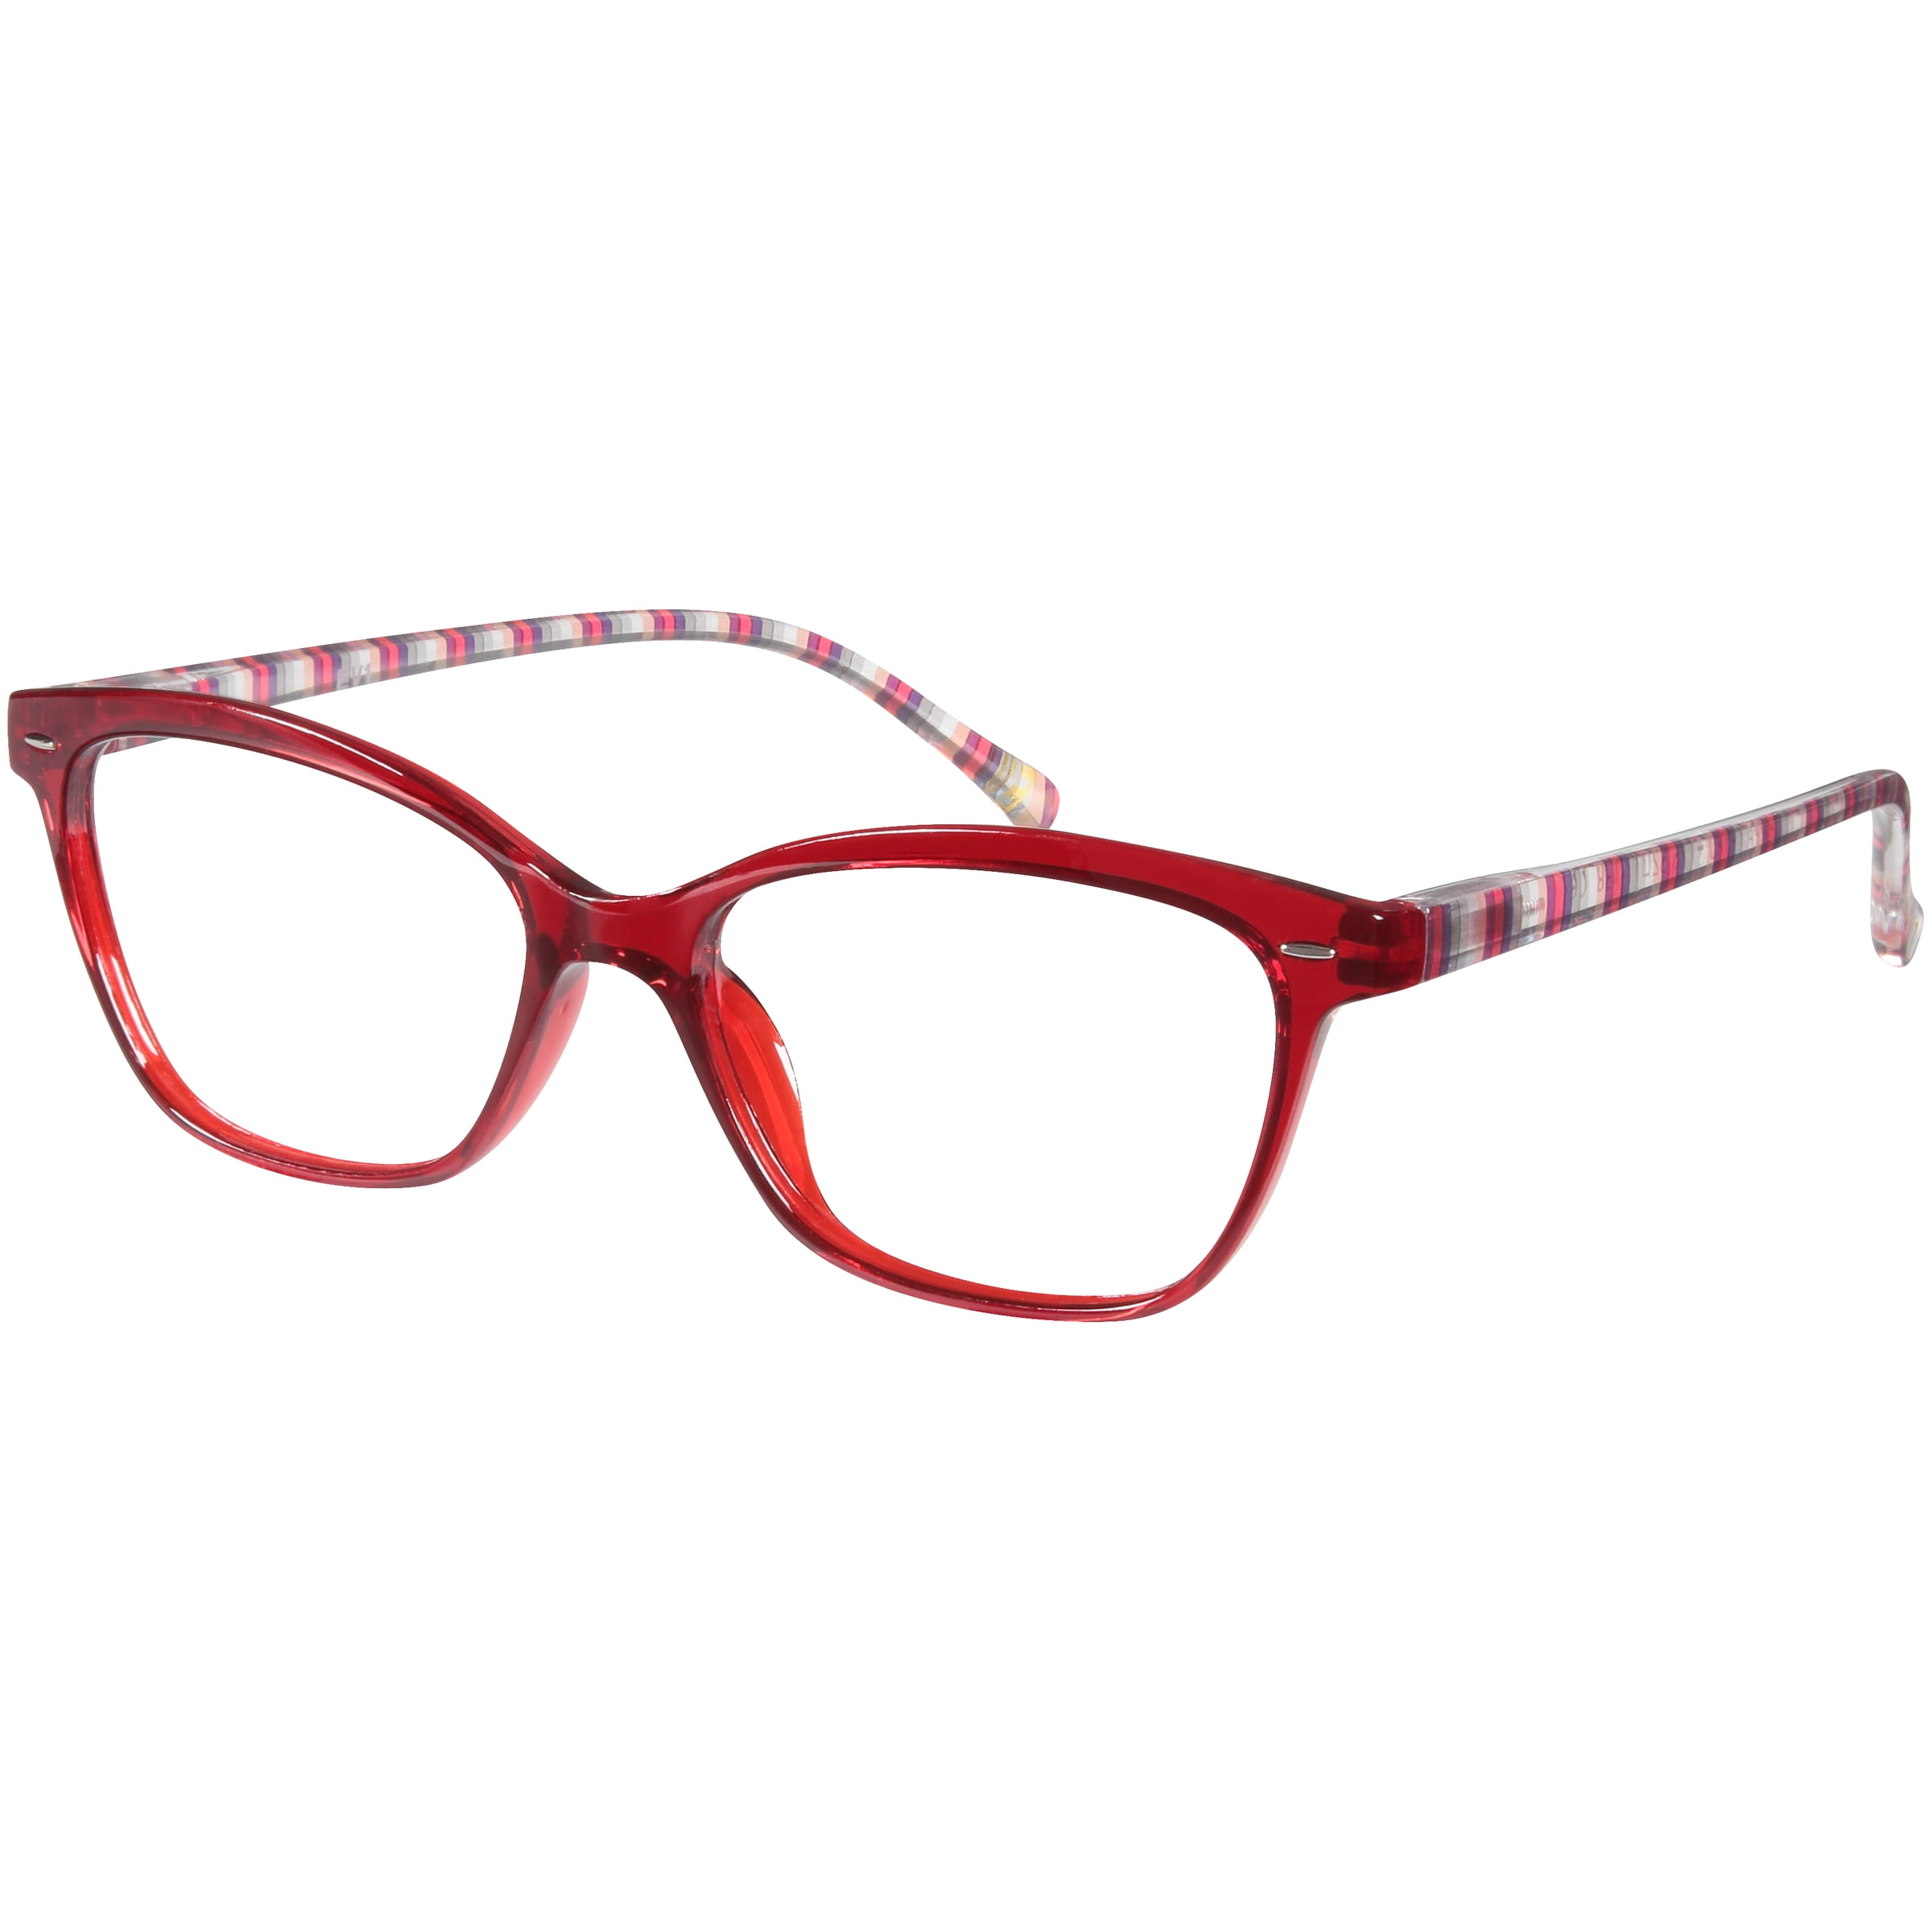 EV1 Pippa Crystal Red +3.00 Reading Glasses with Case